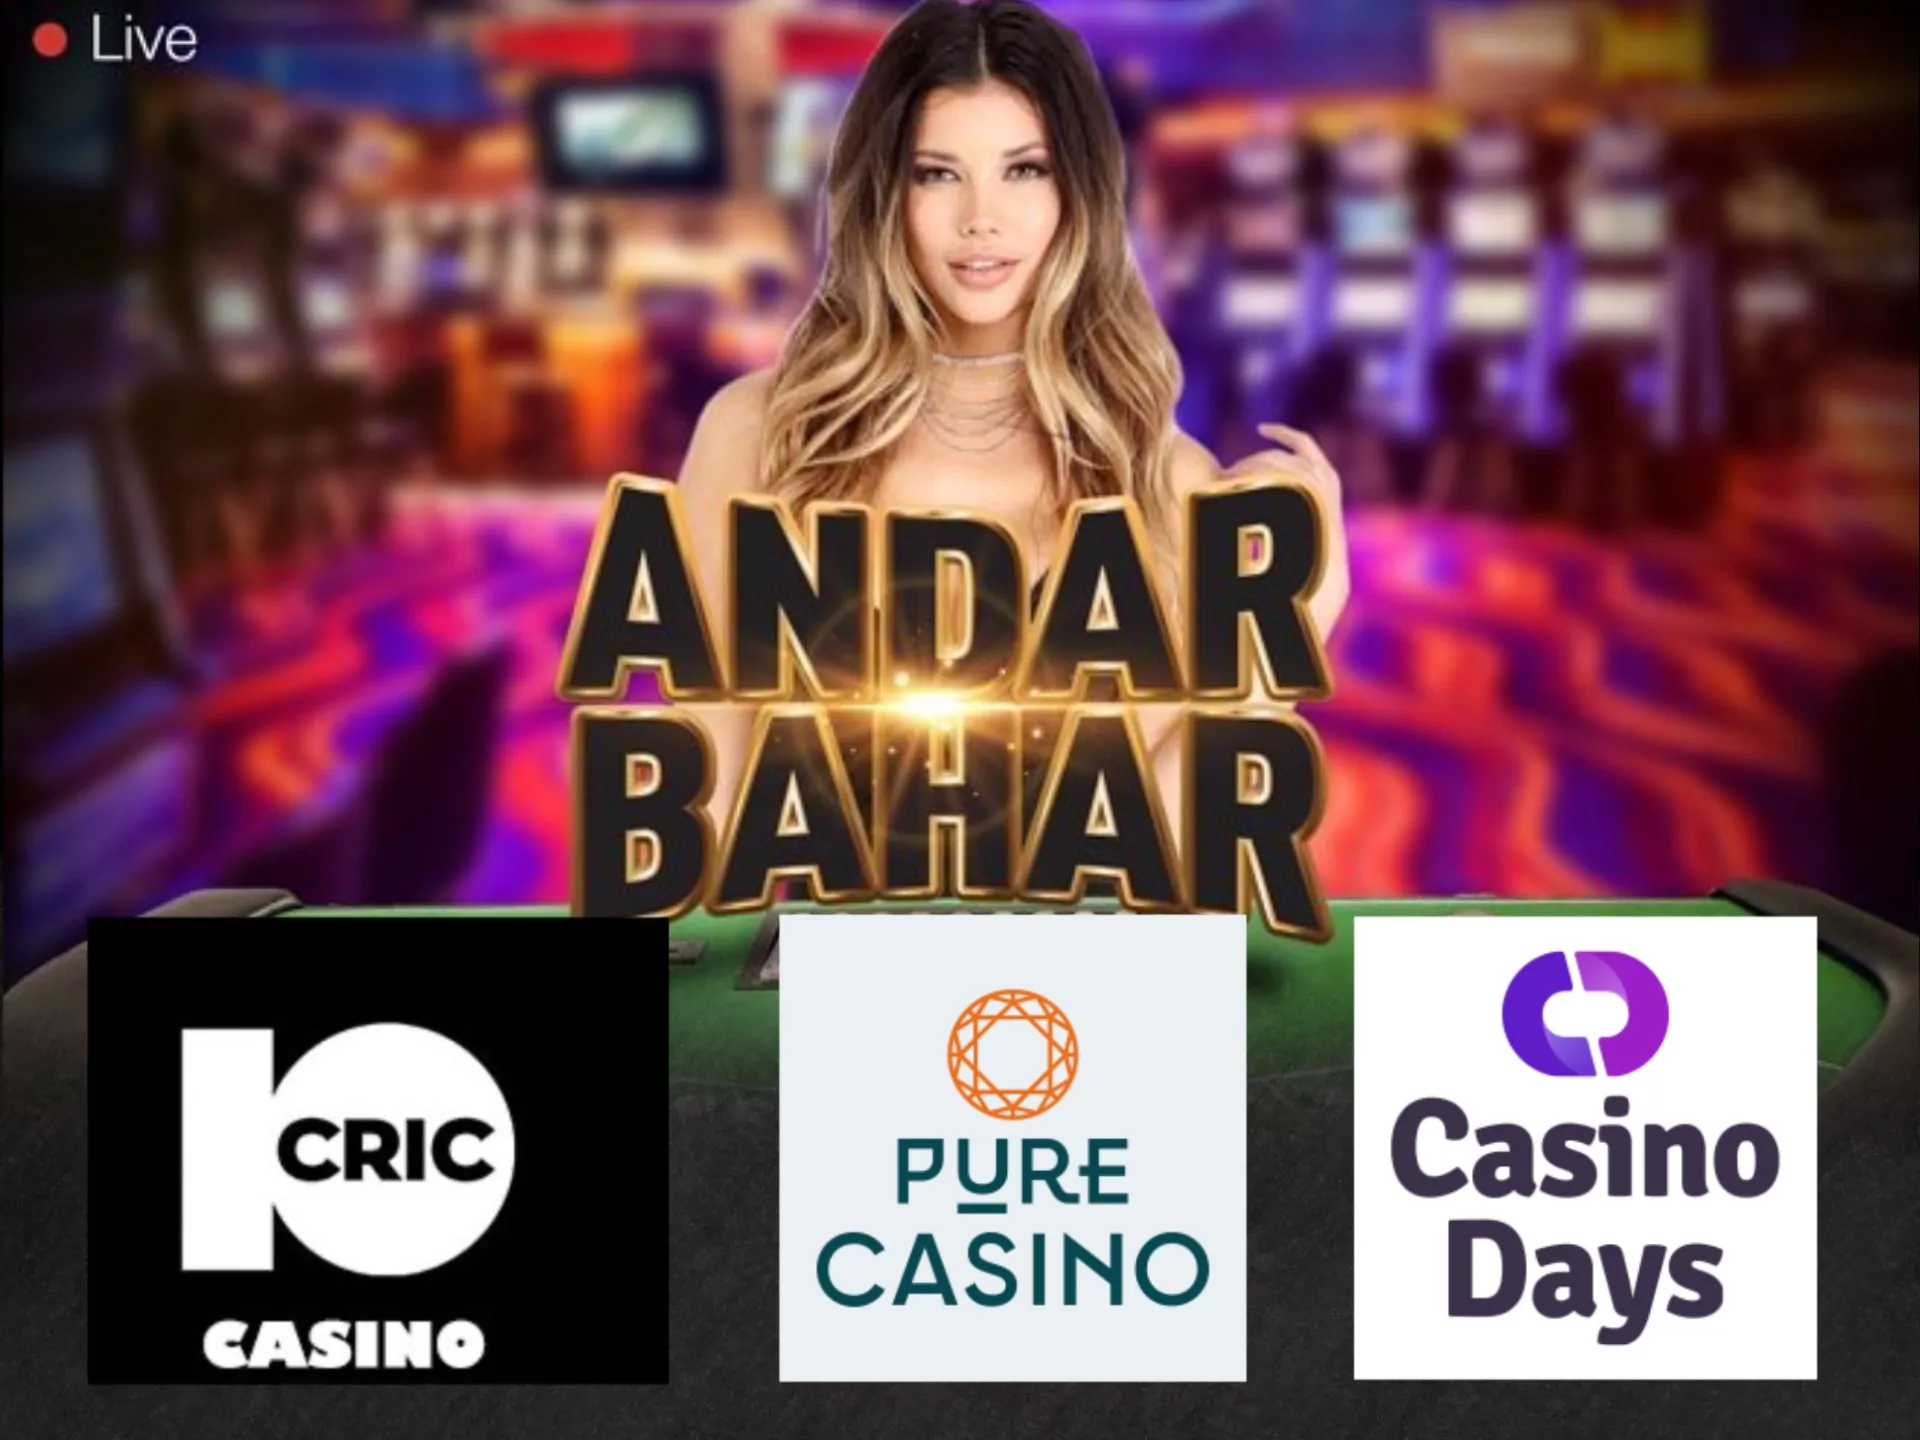 Downloadn and instal the online casino app and start playing Andar Bahar.